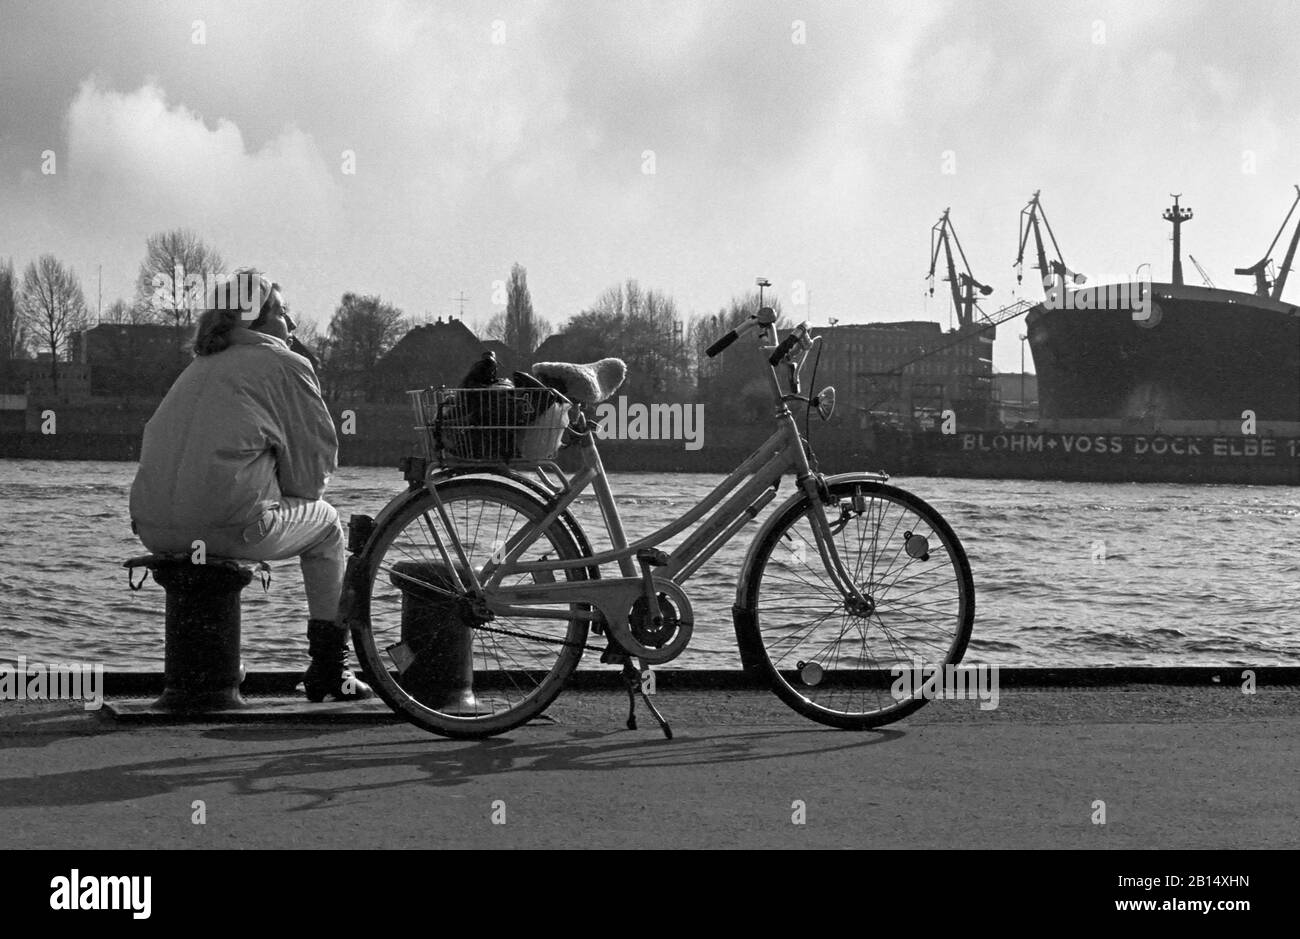 Lady sits on a bollard with her bicycle on the quayside on St. Pauli Landungsbrücken, looking over the Elbe to the shipbuilding complex of Blohm & Voss, Hamburg, Germany, circa 1988.  Black and white film photograph Stock Photo